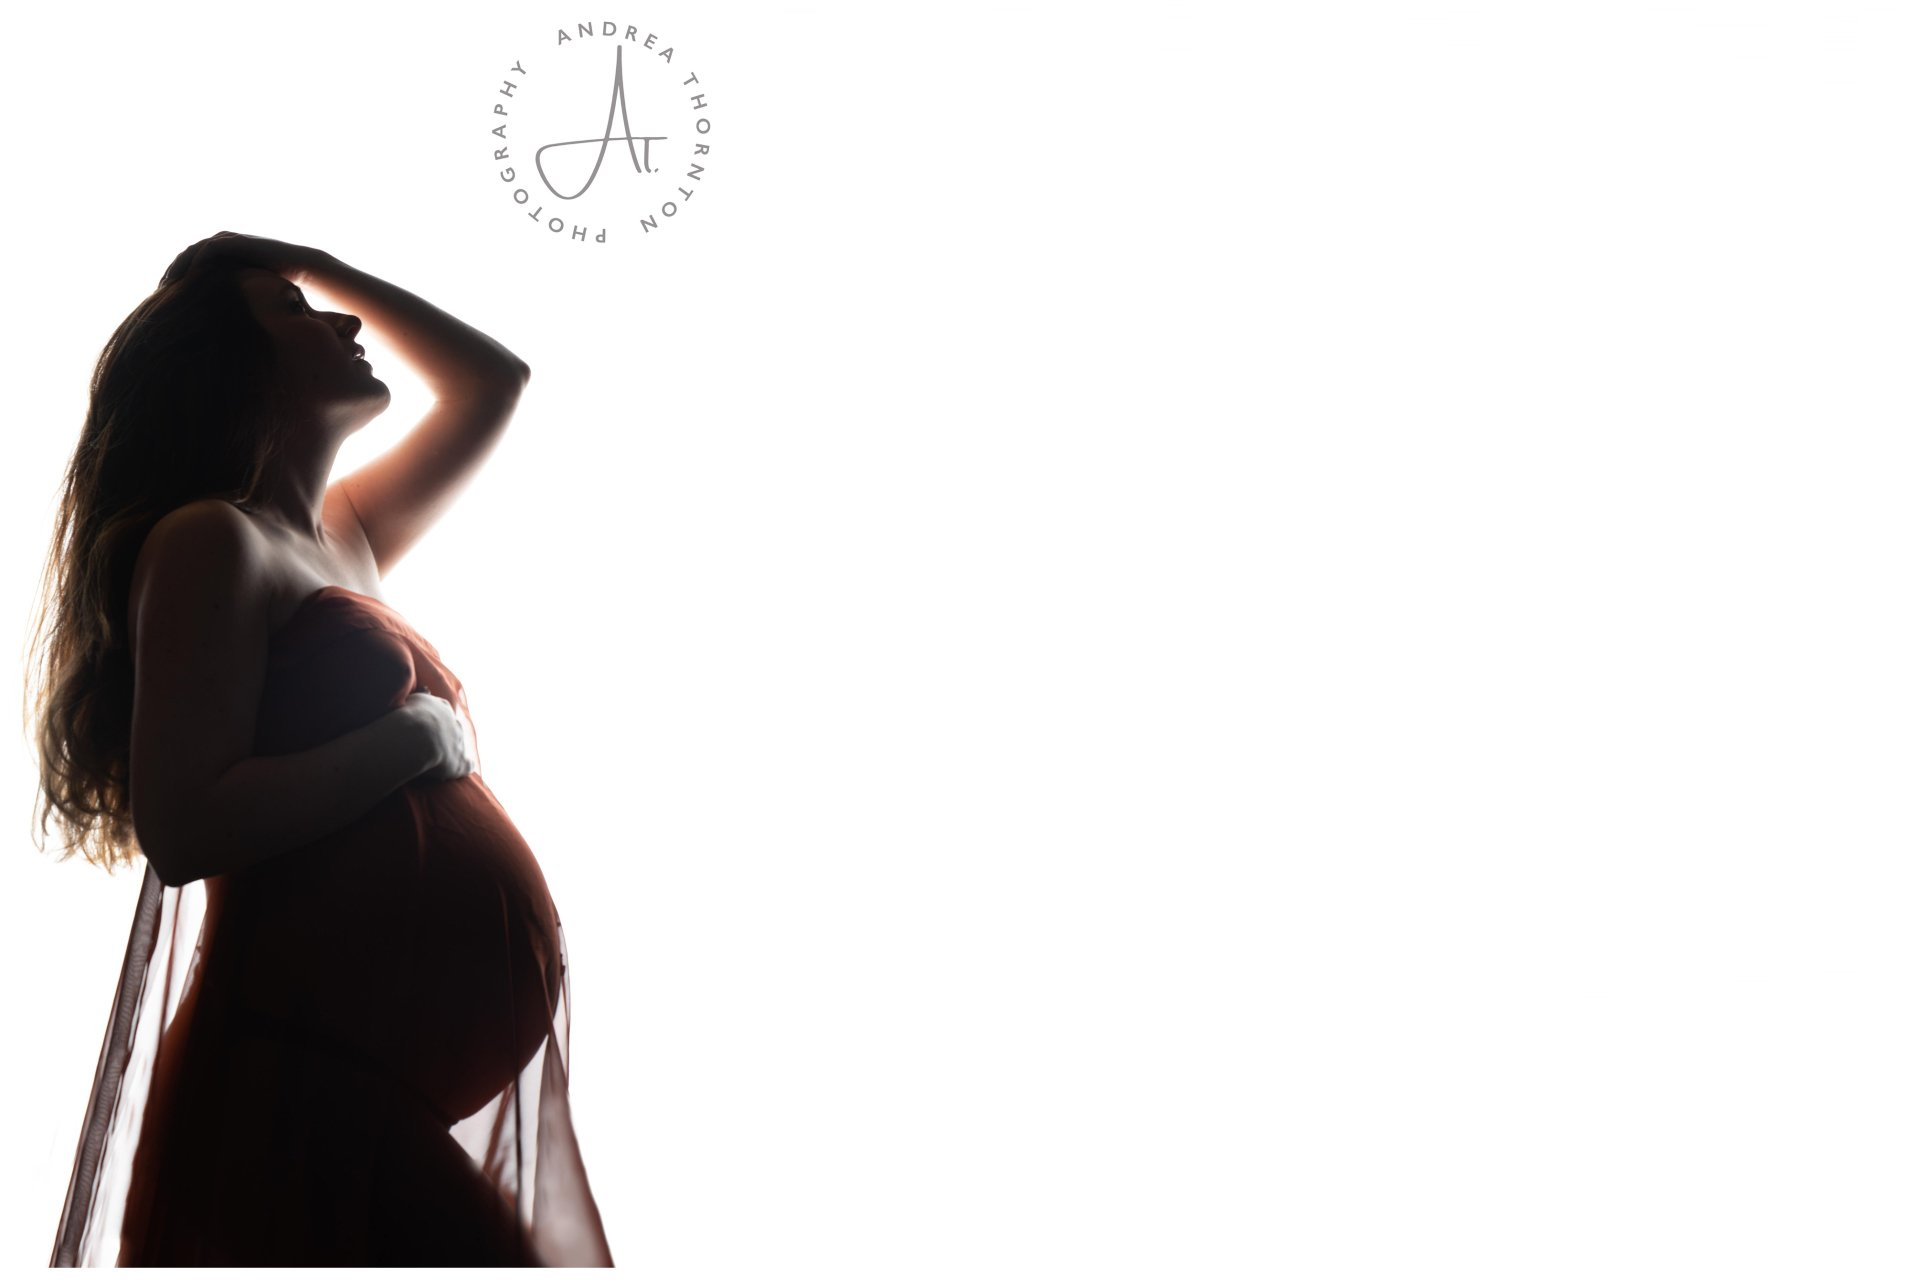 a beautiful photograph of a heavily pregnant woman silhouetted